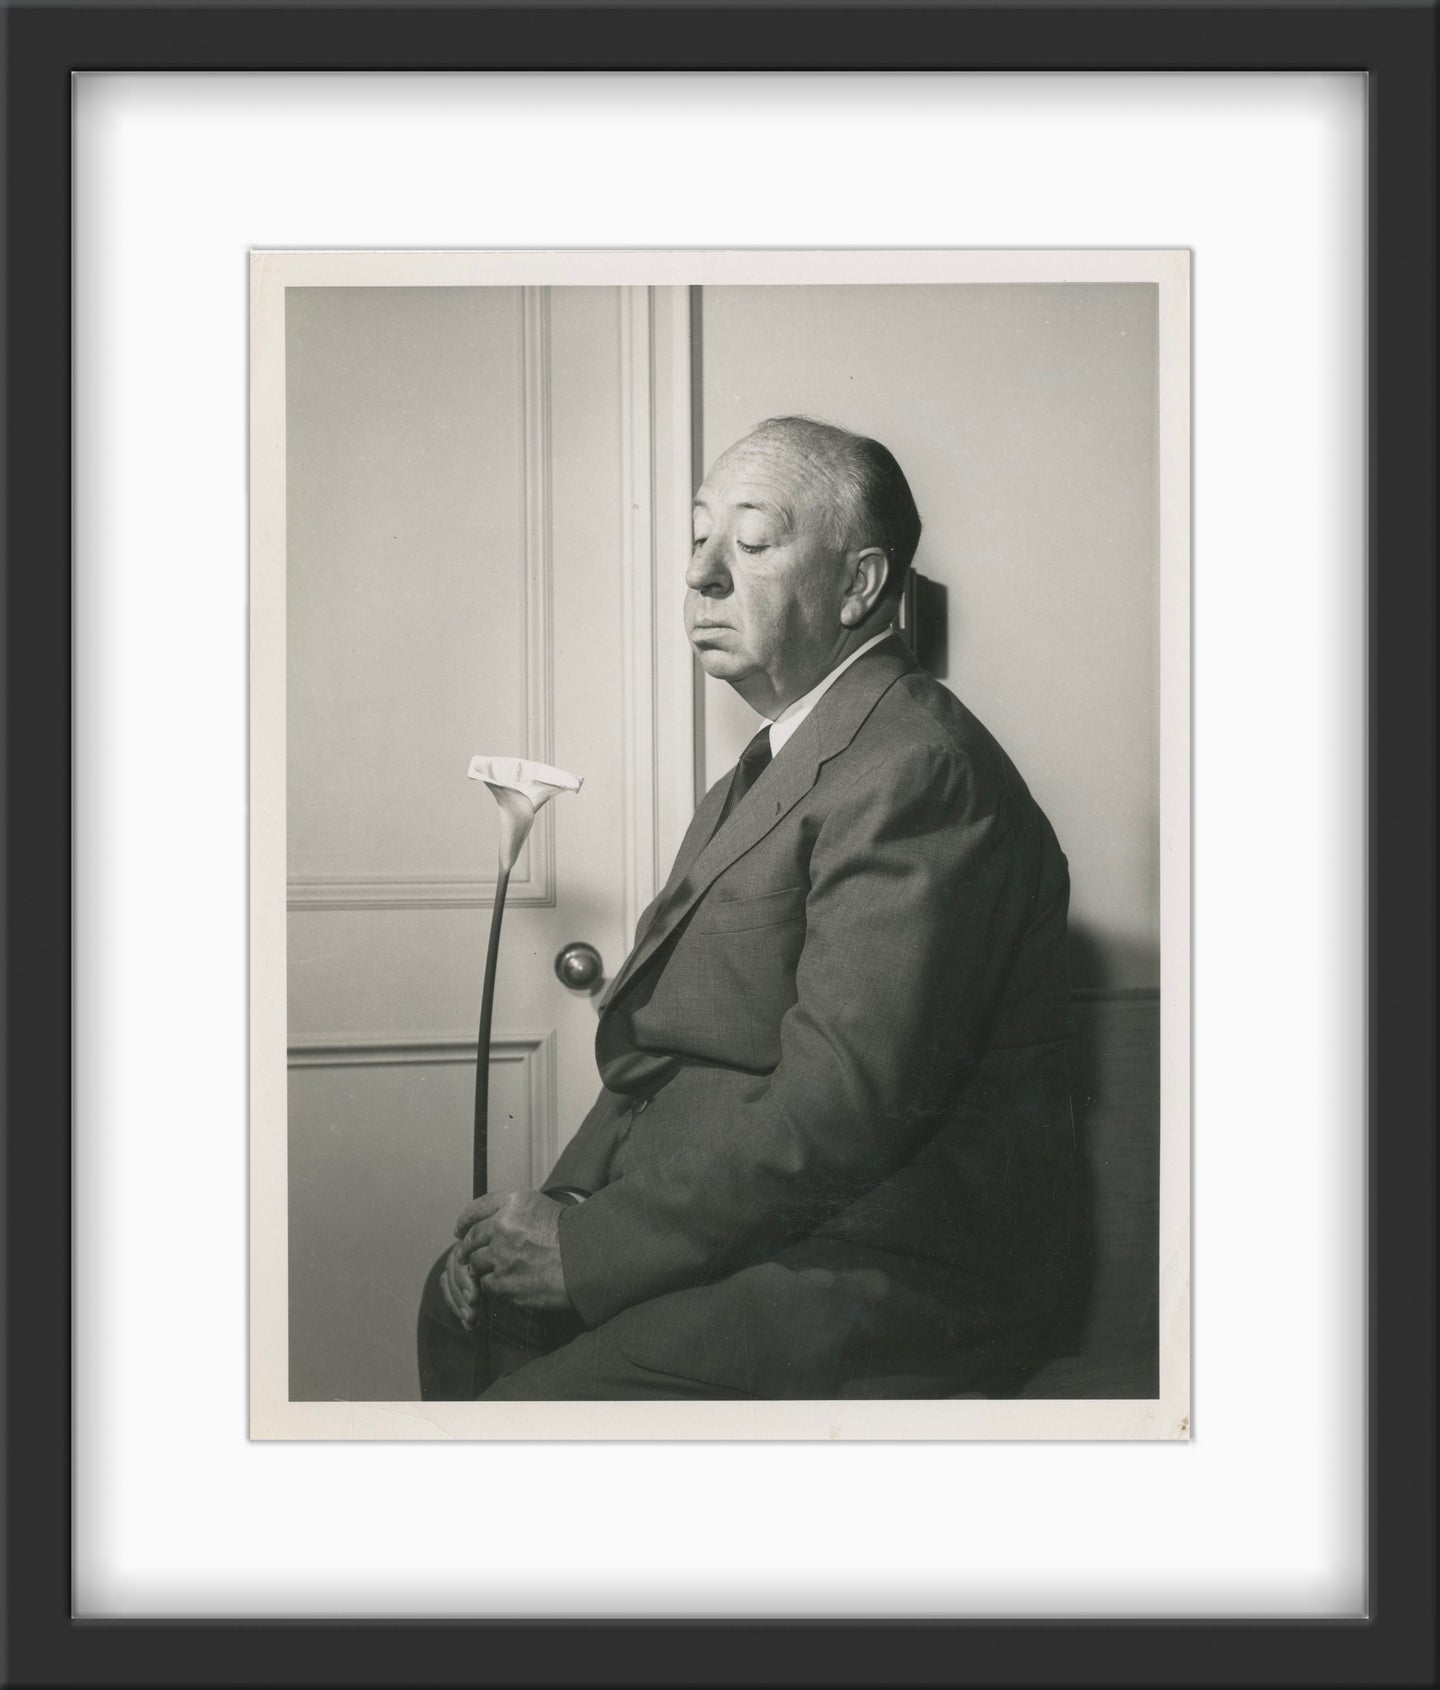 An original promotional still for the TV series Alfred Hitchcock Presents